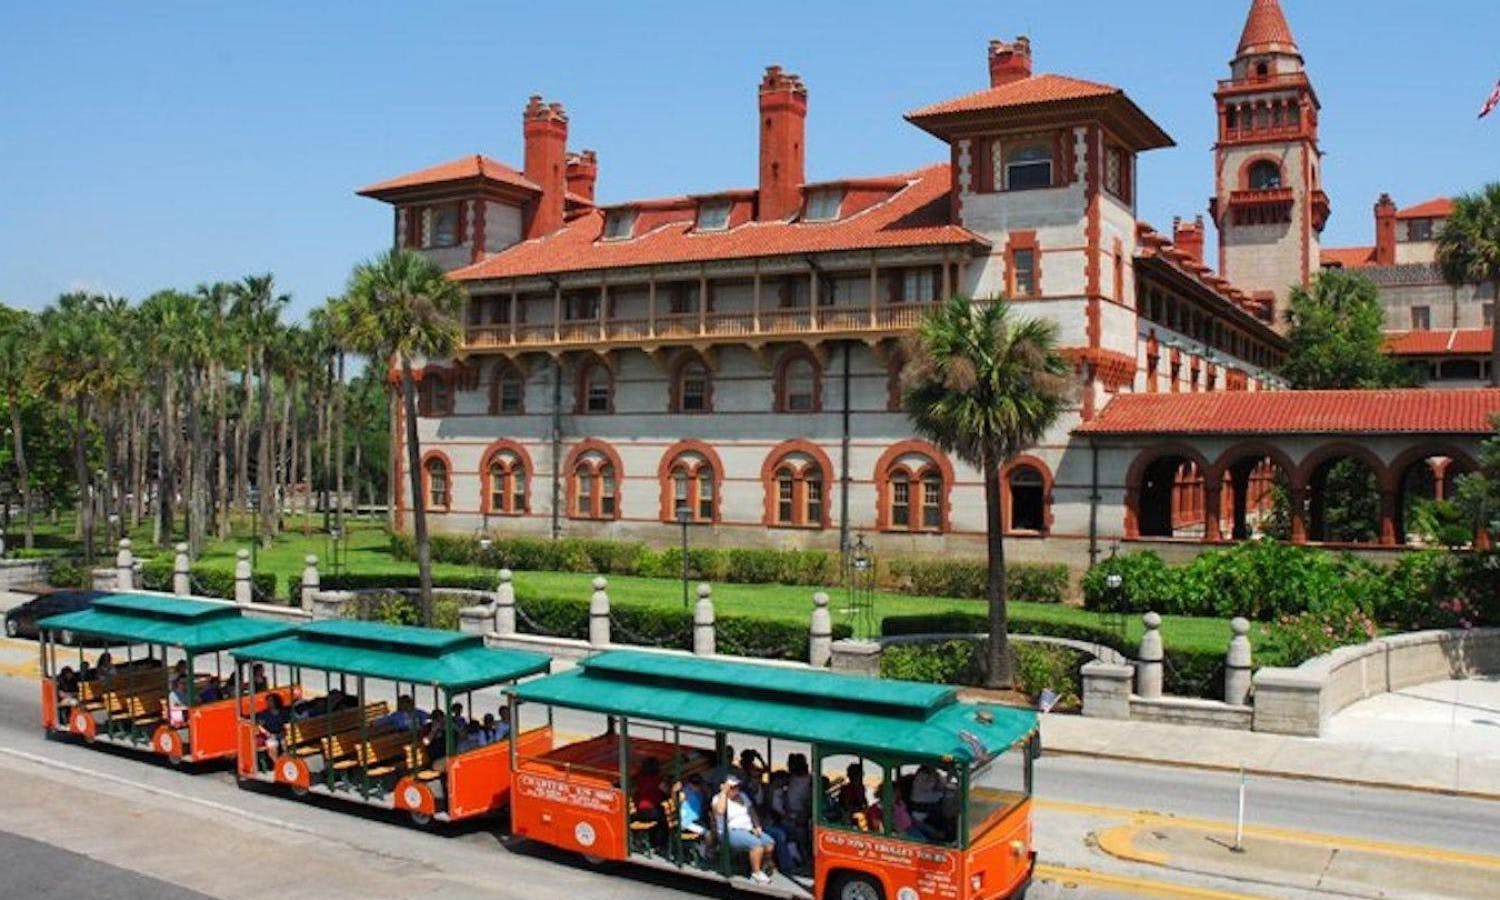 Day trip to St Augustine with trolley tour